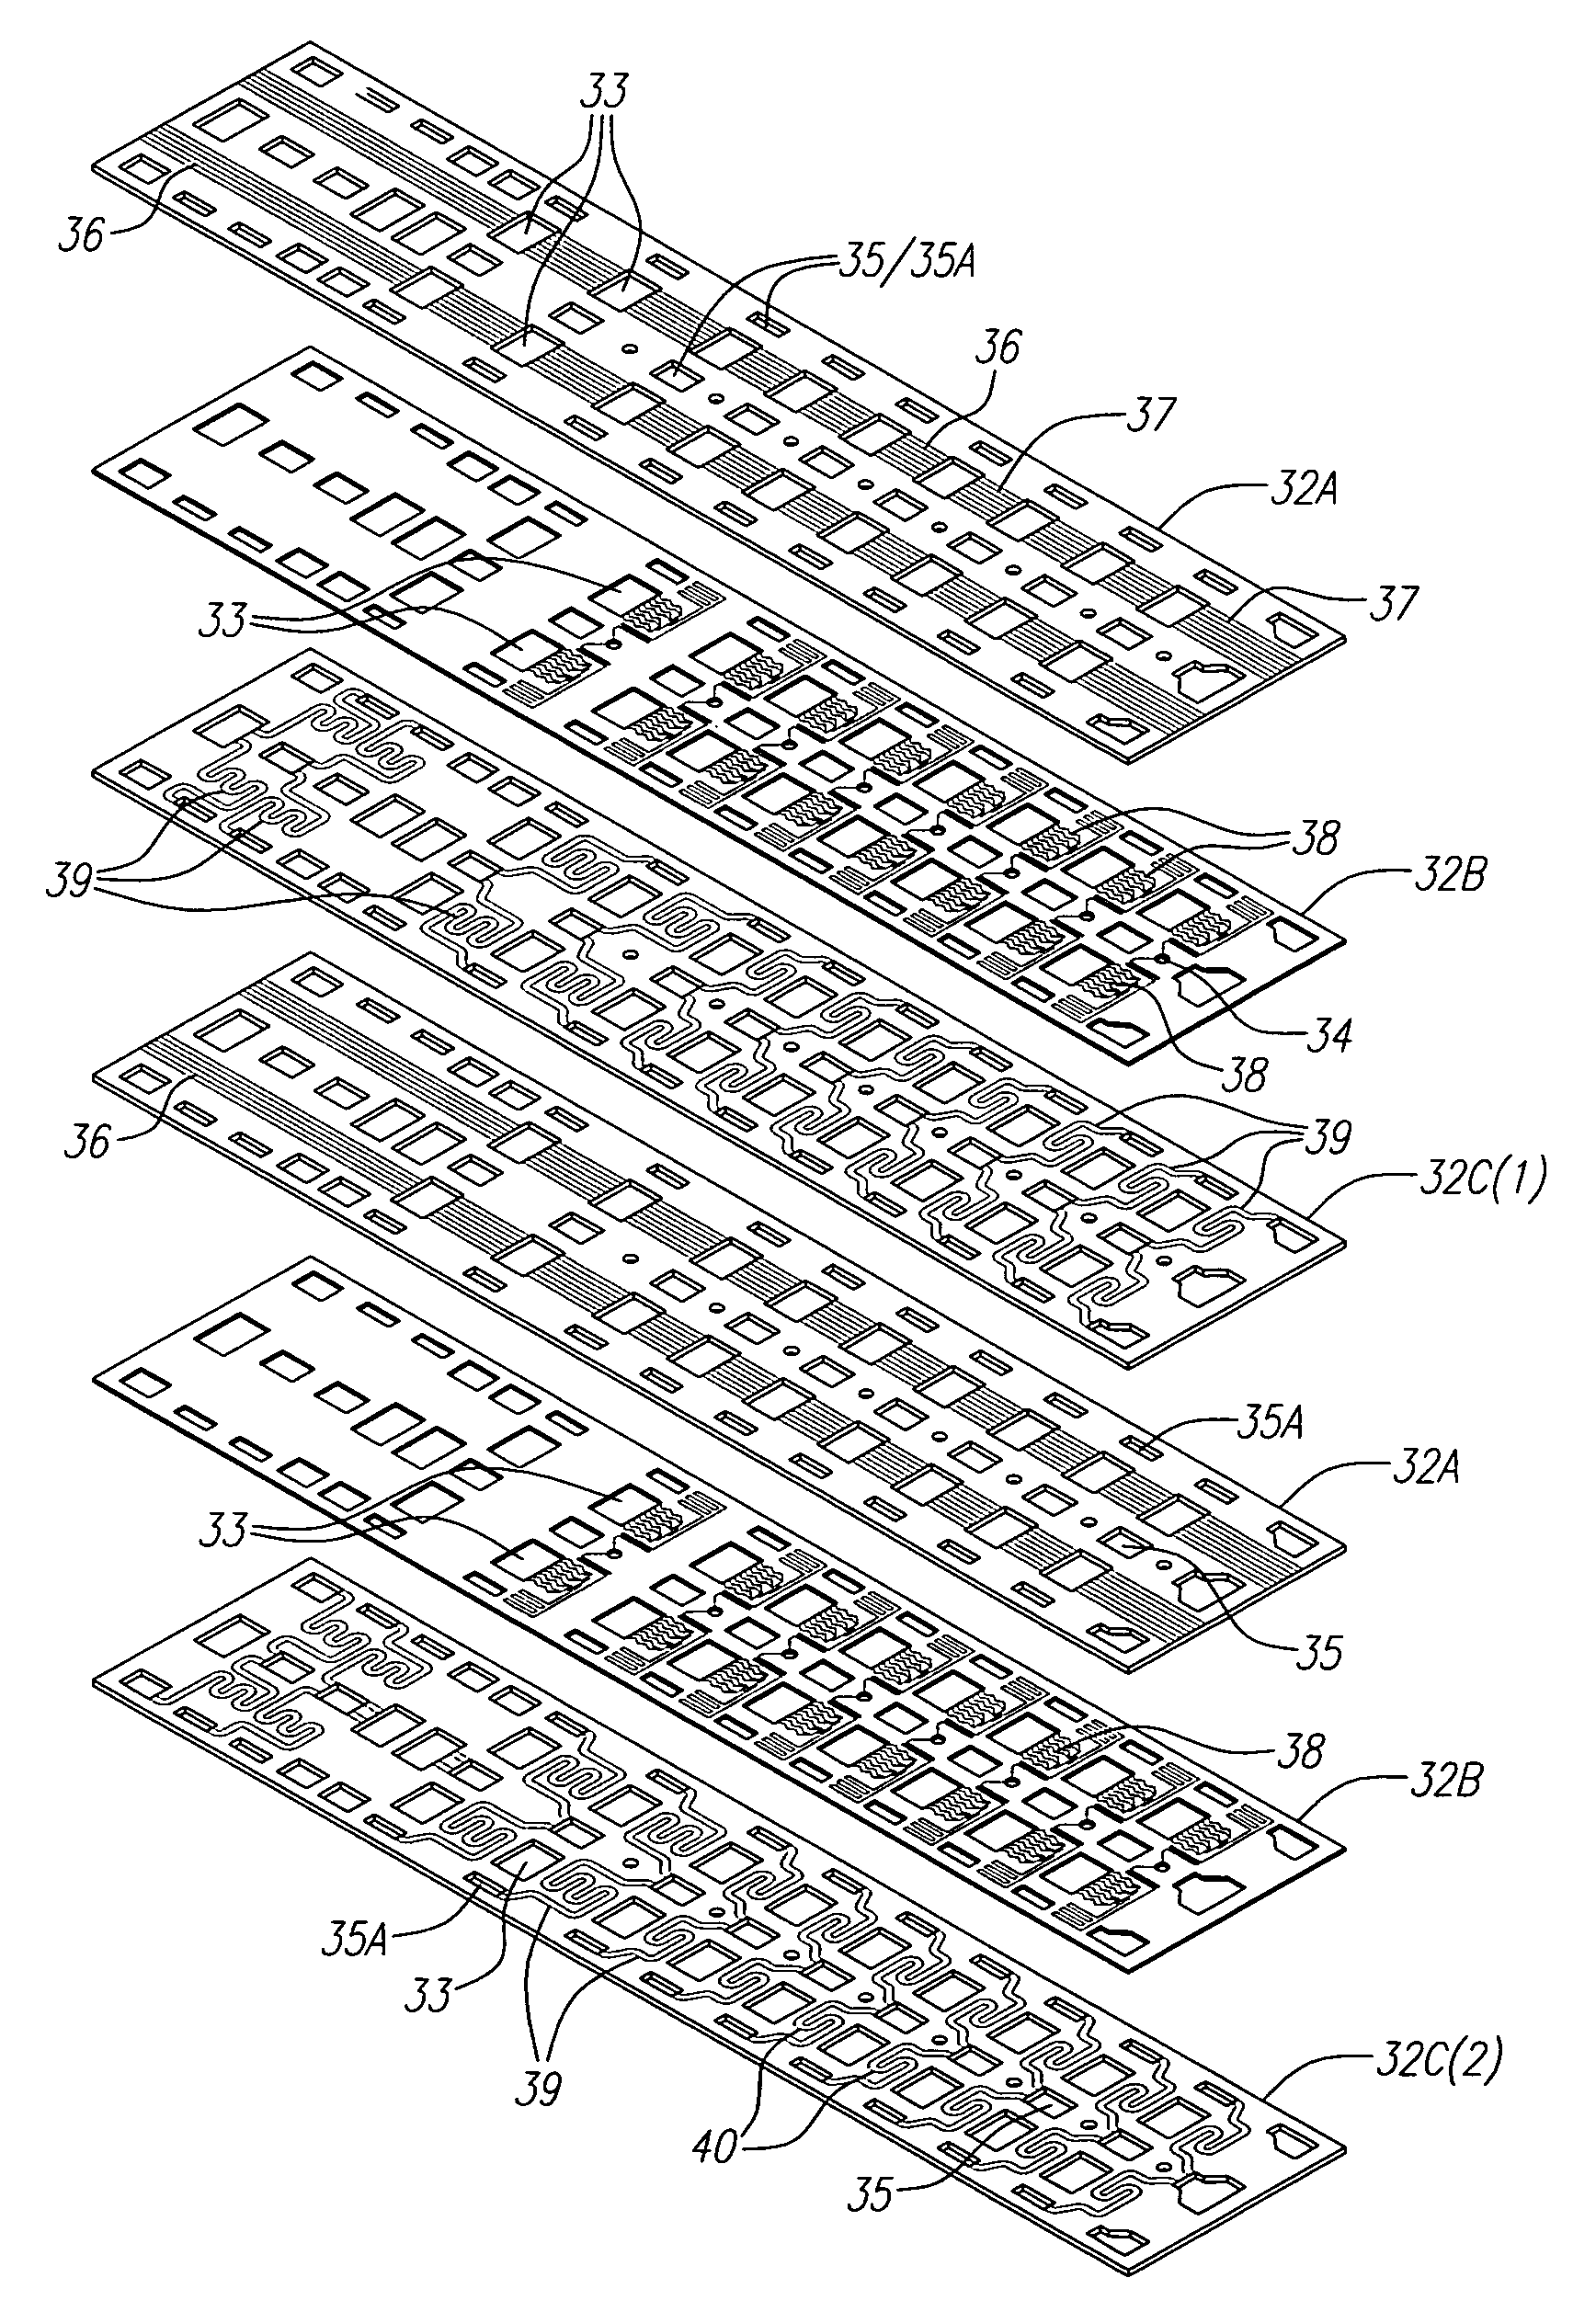 Reformer apparatus and method